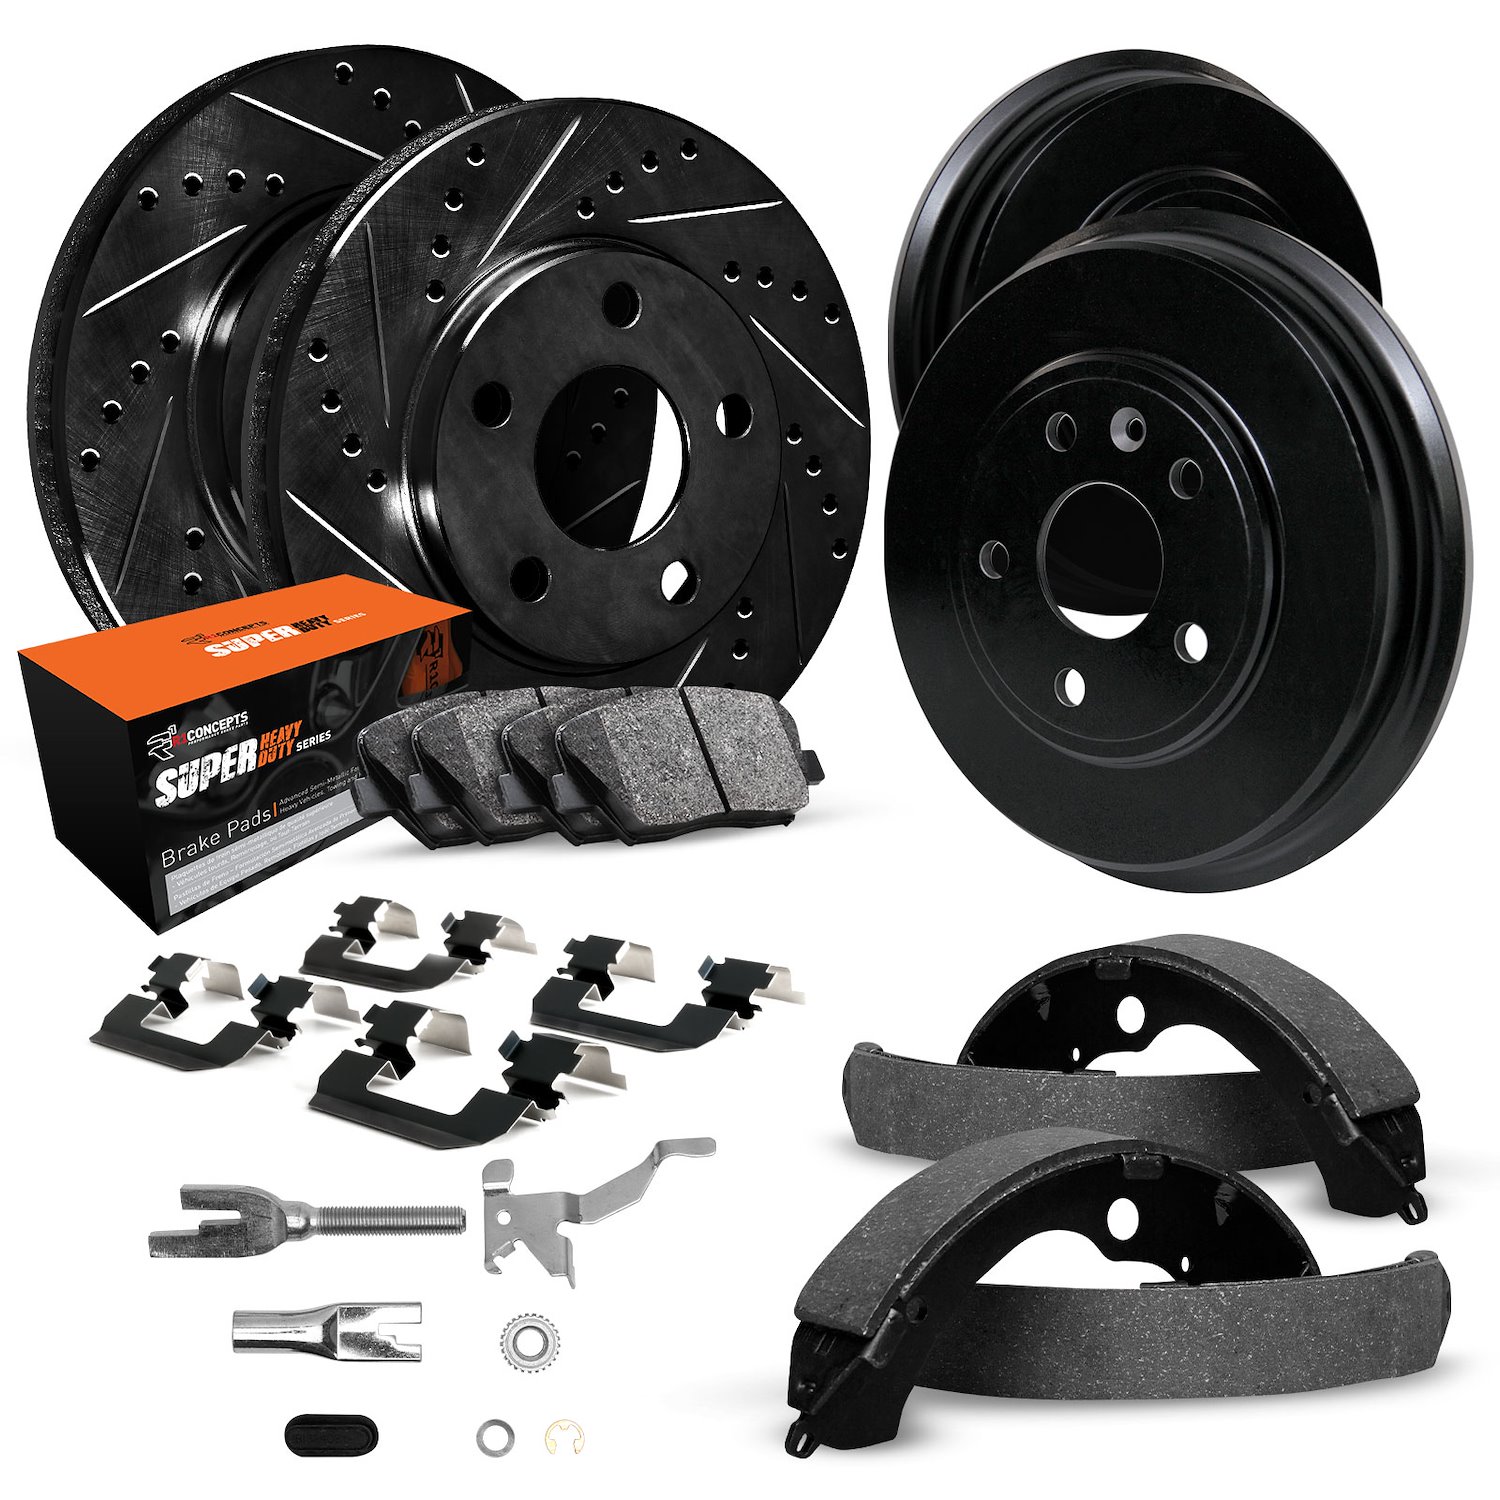 E-Line Slotted Black Brake Rotor & Drum Set w/Super-Duty Pads, Shoes, Hardware/Adjusters, 1990-1994 Ford/Lincoln/Mercury/Mazda